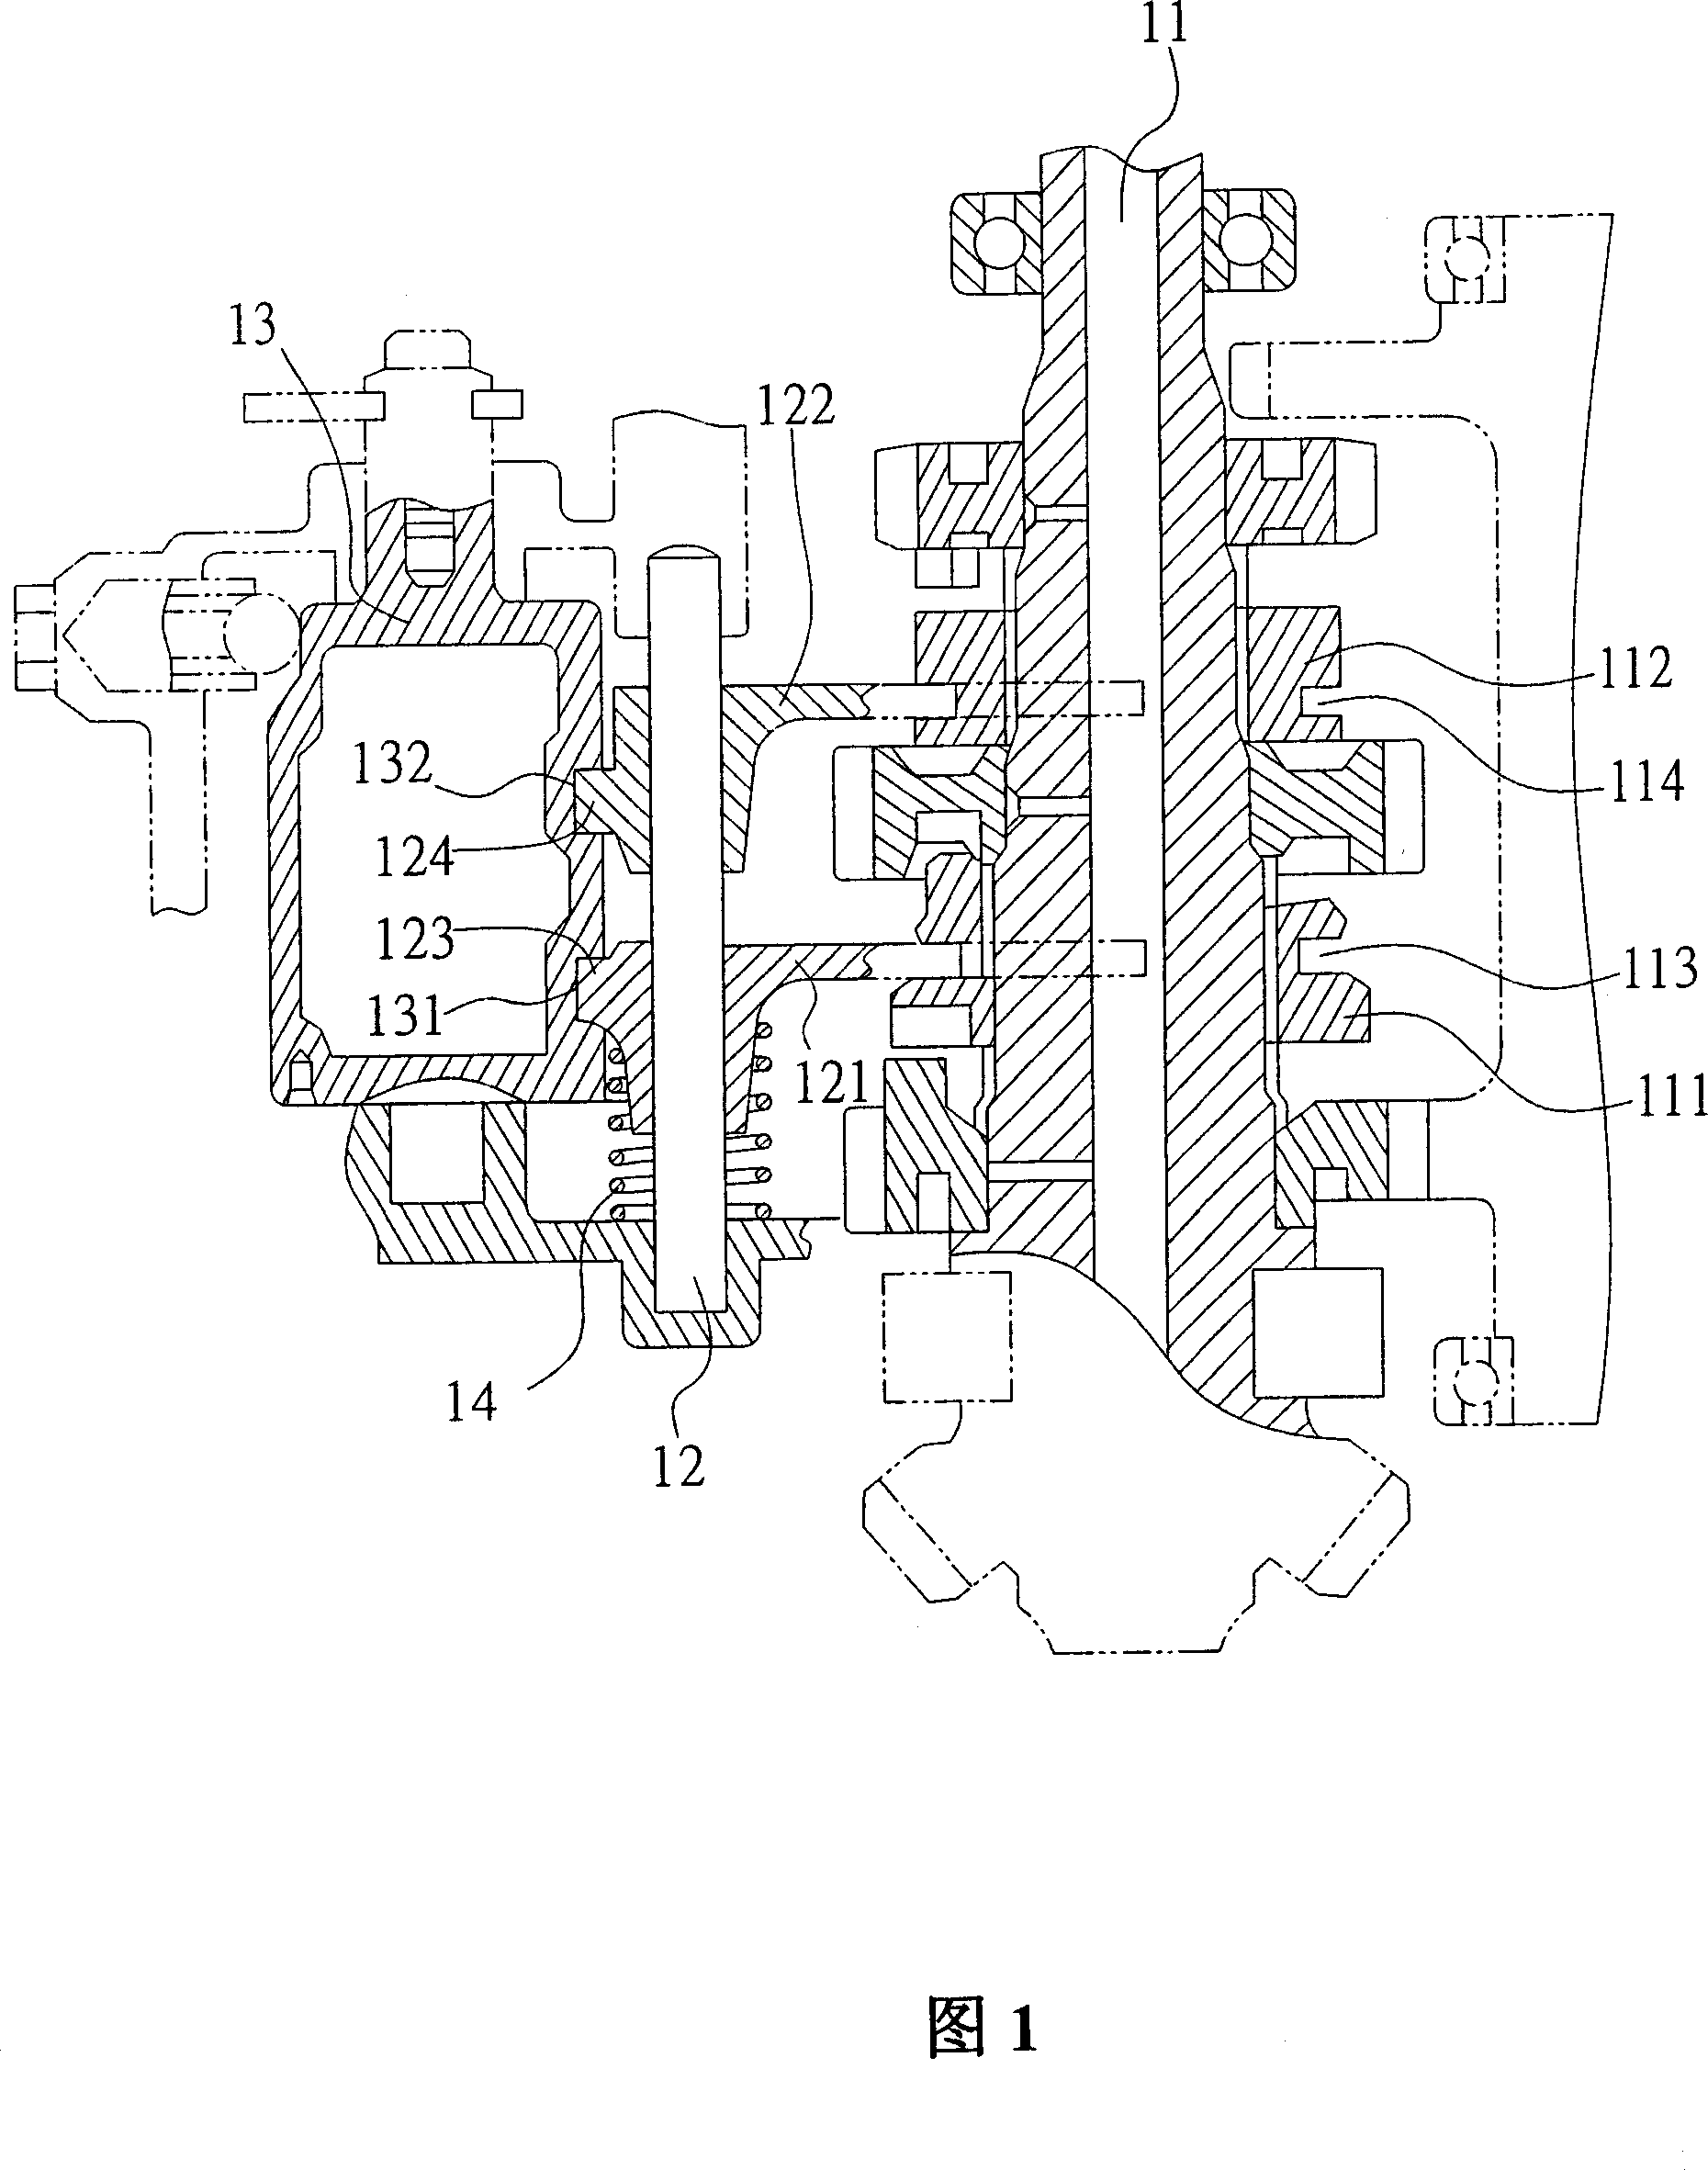 Pull-fork assembly of vehicle